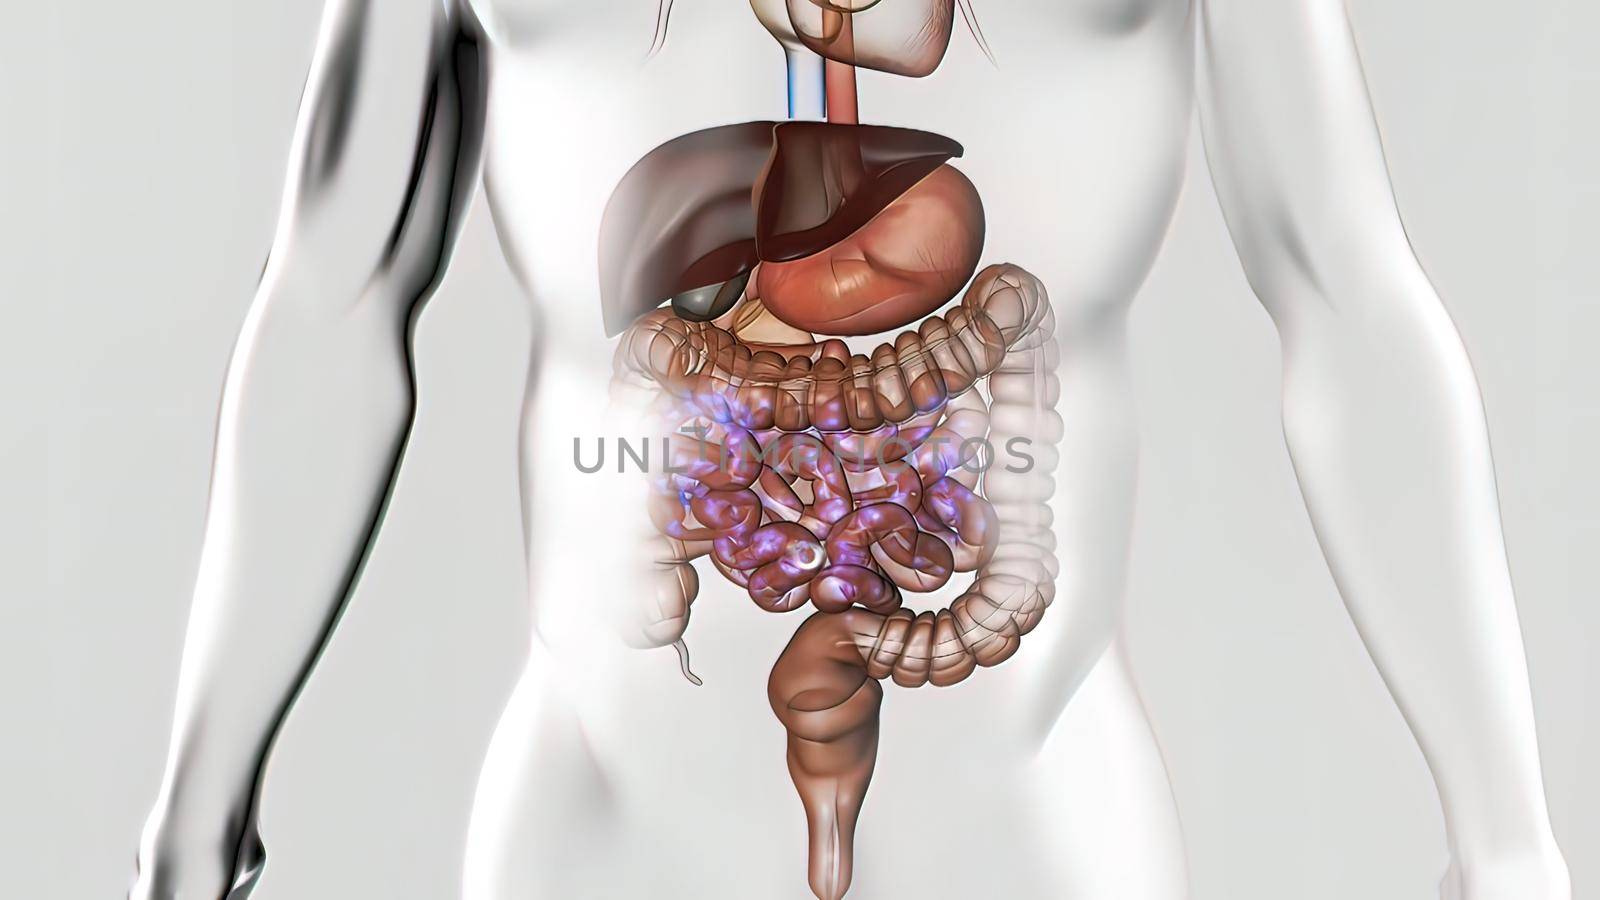 Human Digestive System Anatomy Concept. 3D illustration by creativepic